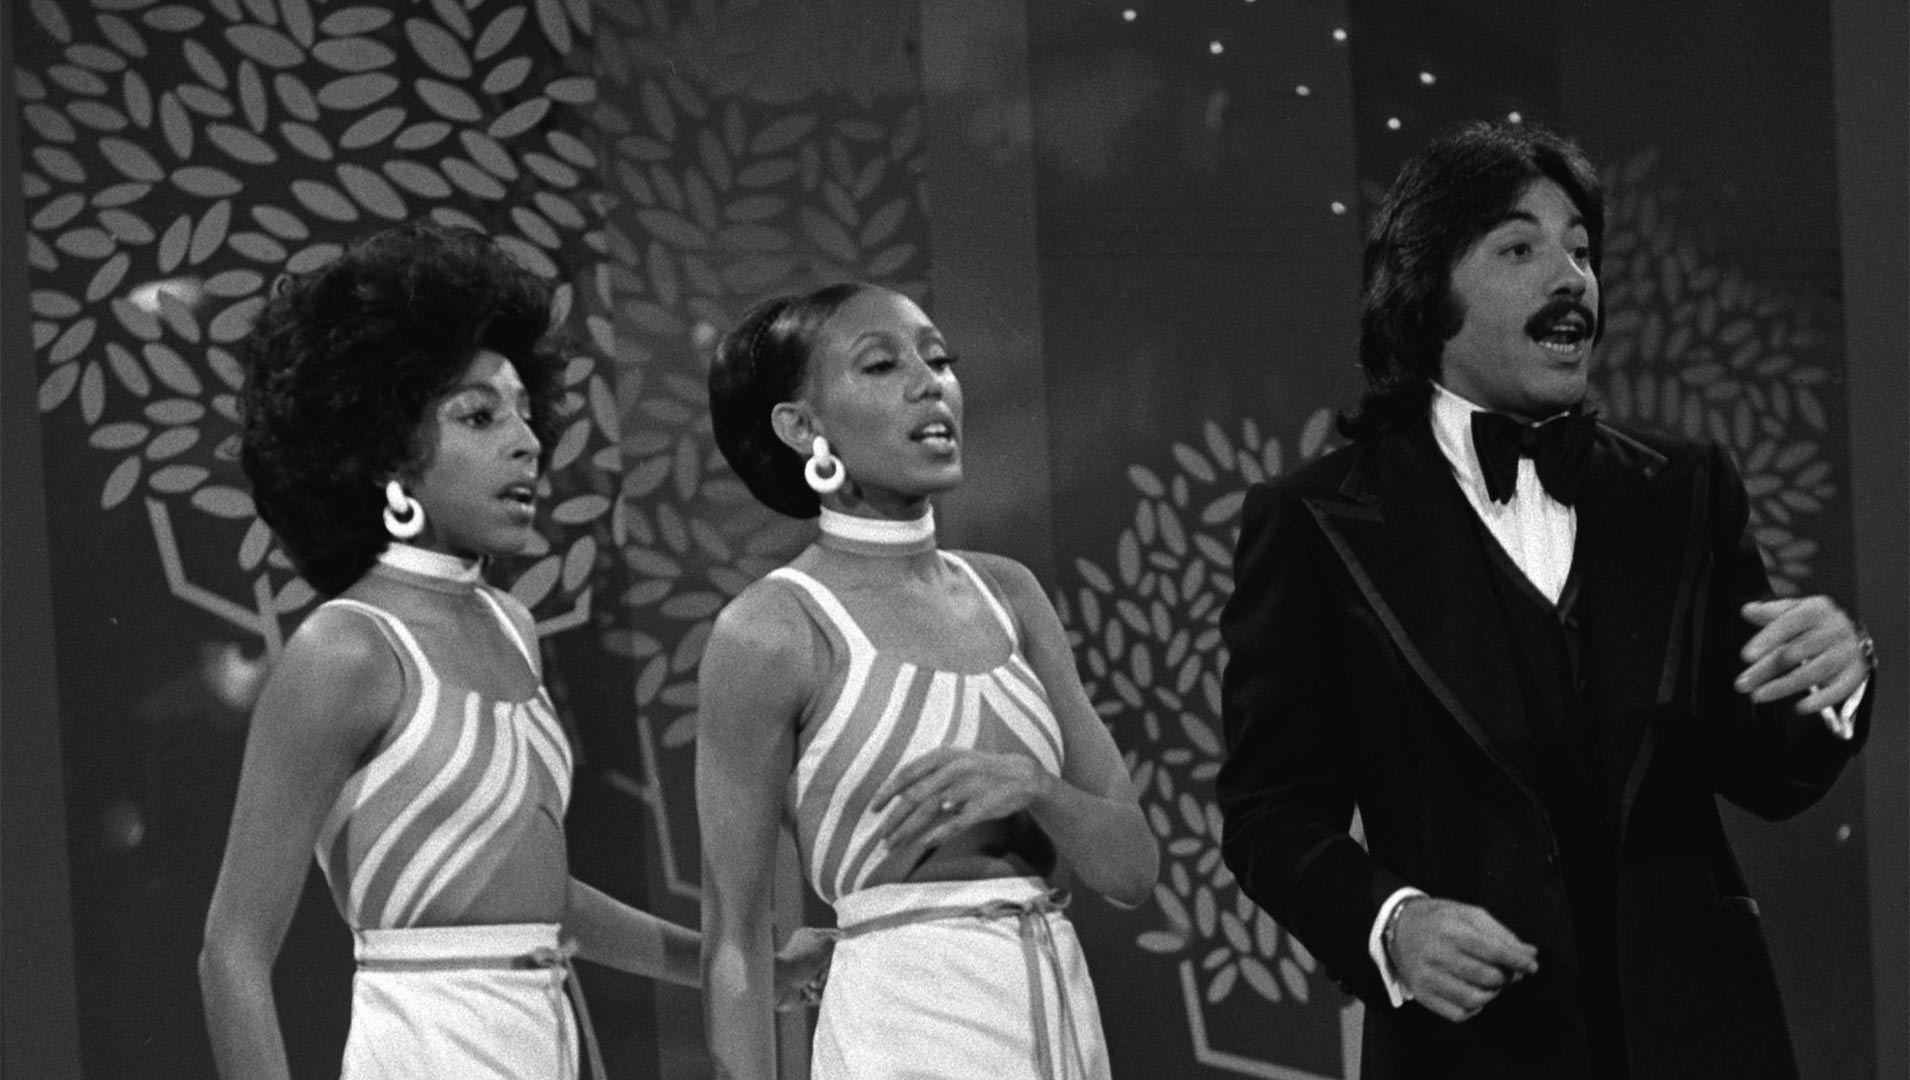 Entertainer Tony Orlando reunites with his singing group Dawn to bring "Tie a Yellow Ribbon 'Round the Ole Oak Tree" and other 1970s classics